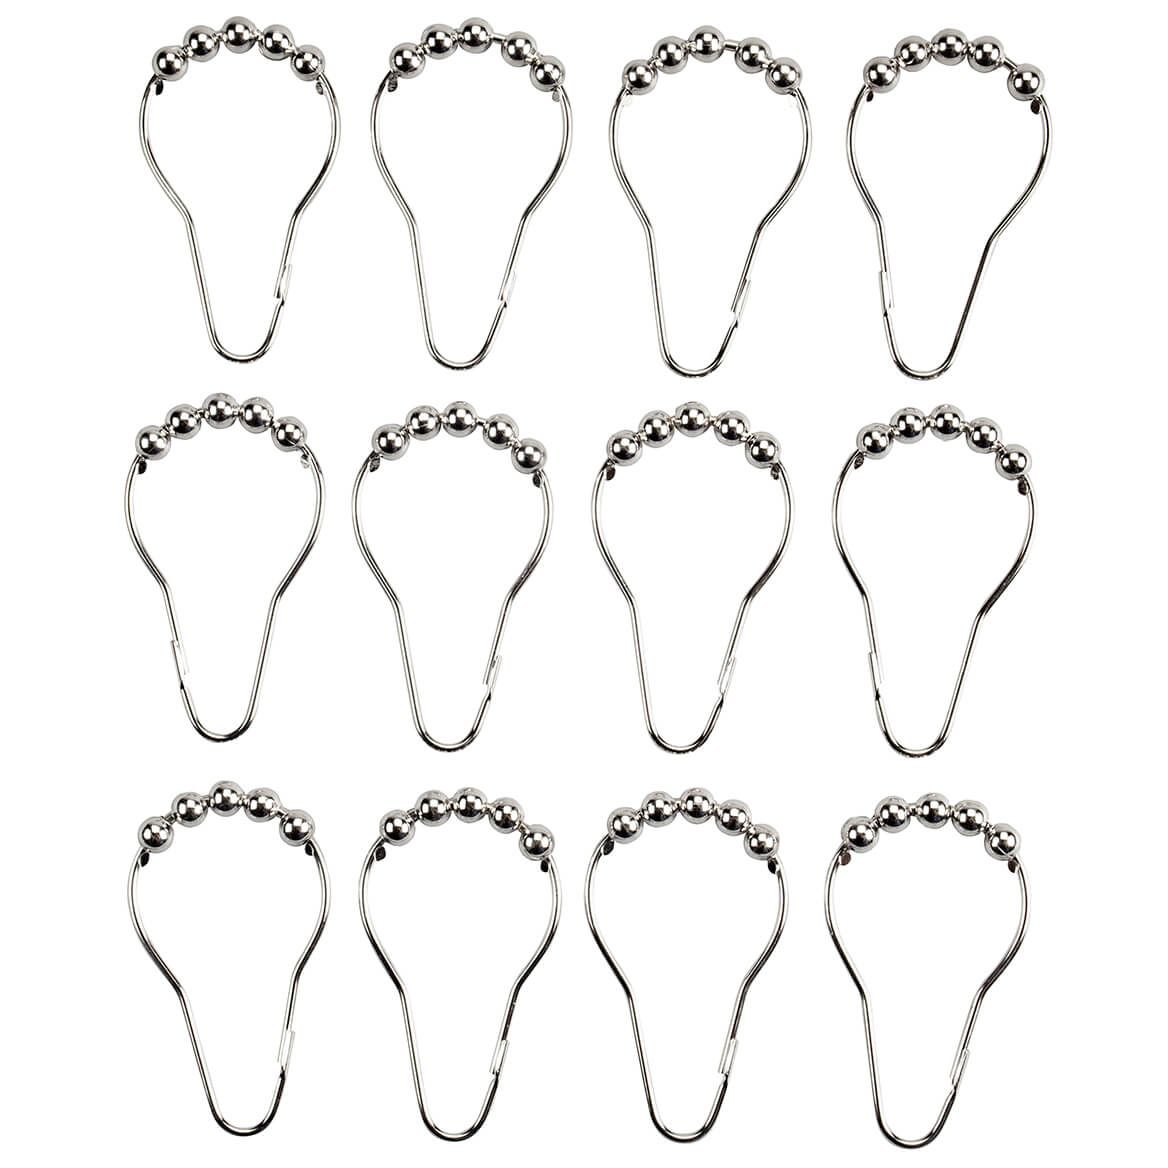 Stainless Steel Shower Curtain Rings, Set of 12 + '-' + 372839